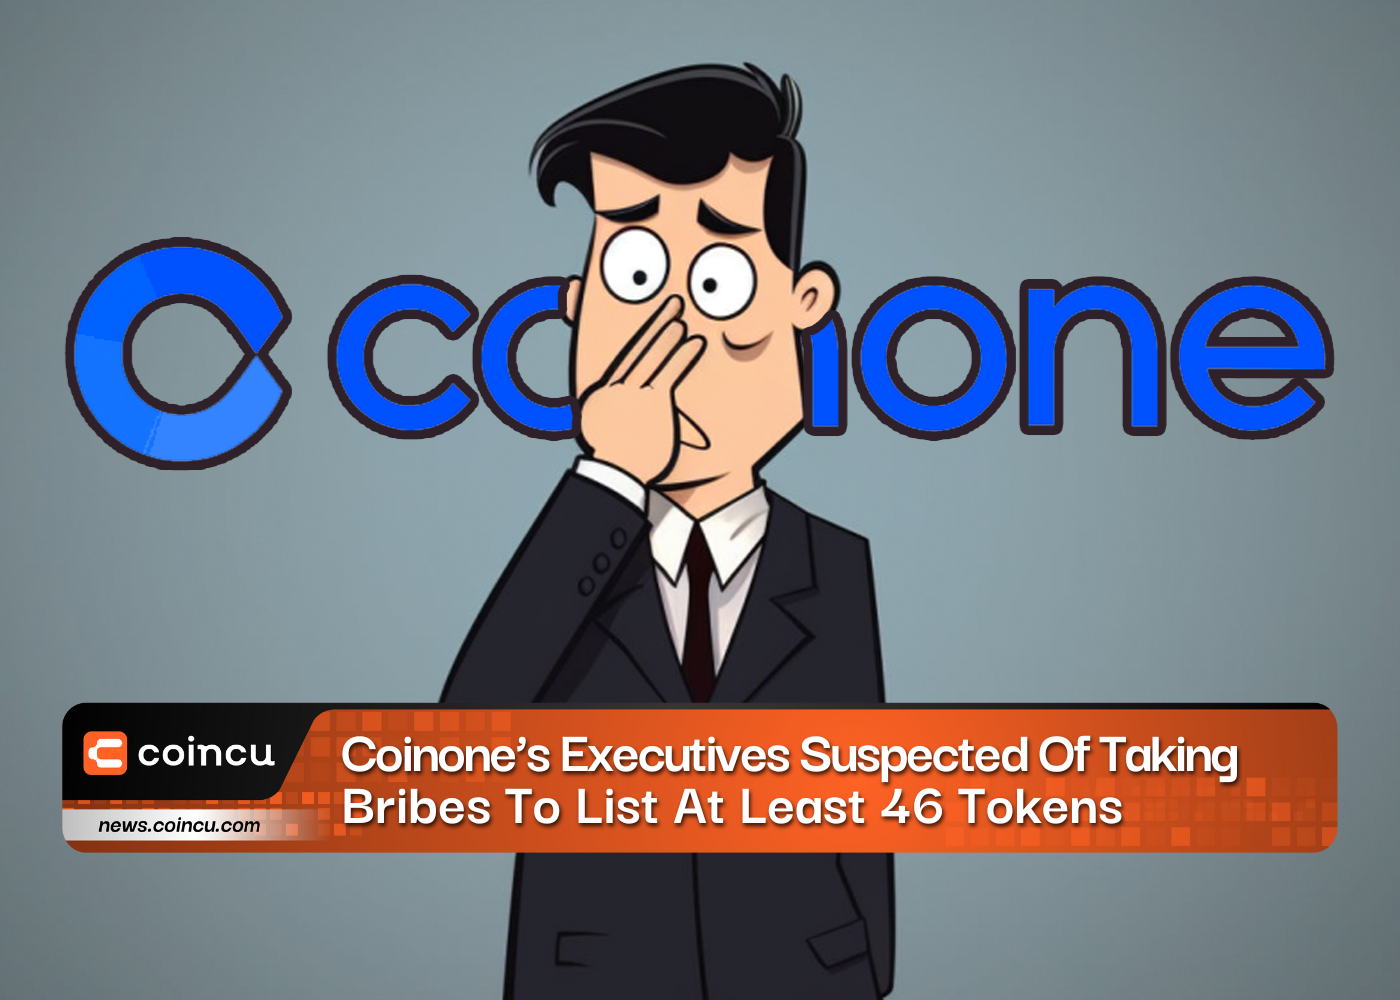 Coinone's Executives Suspected Of Taking Bribes To List At Least 46 Tokens